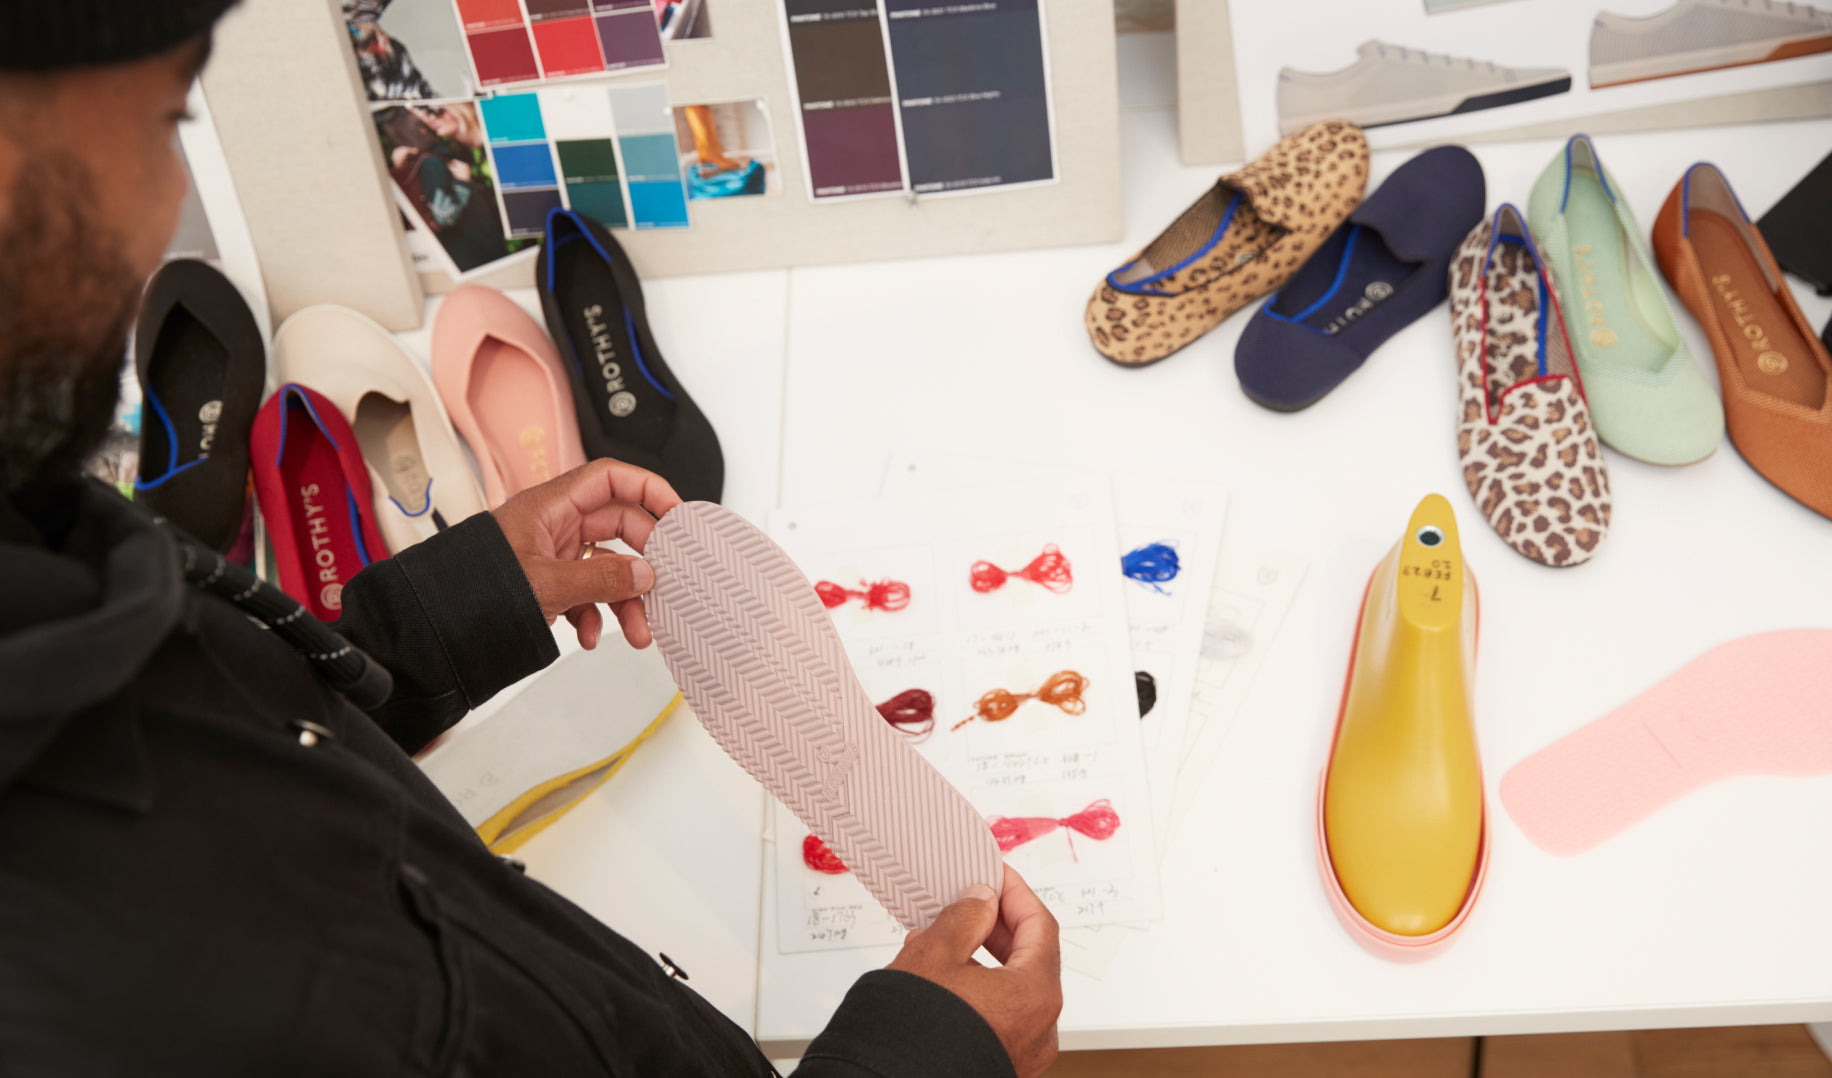 Lavion holding a light pink shoe outsole in front of a table with shoes and design materials.